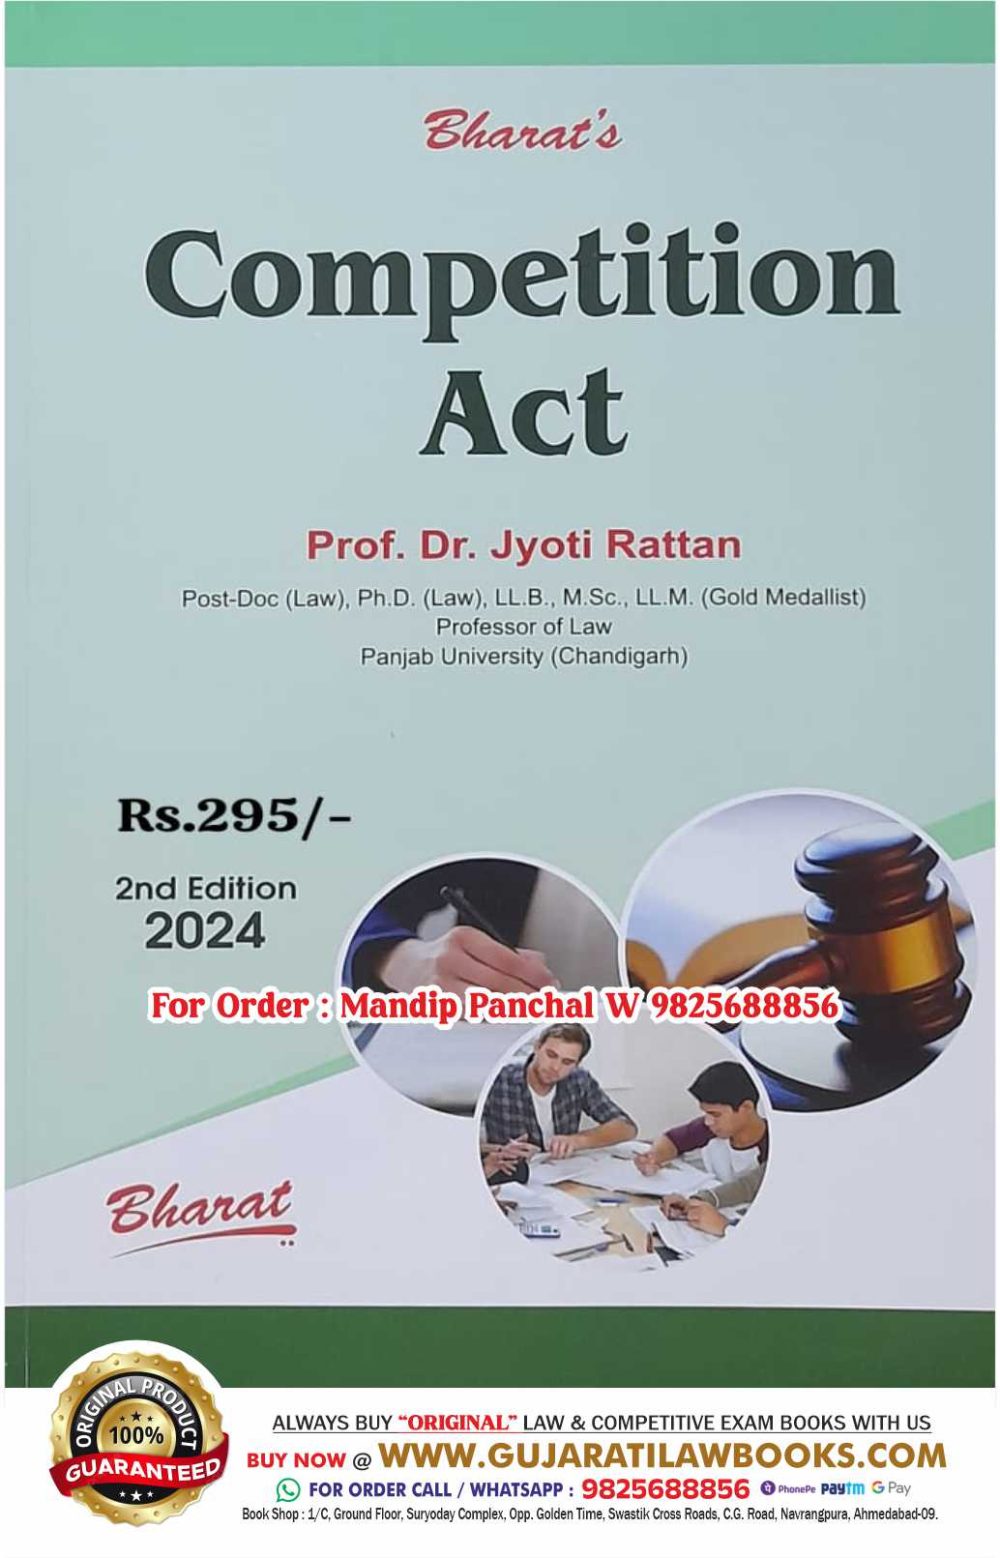 Bharat's Competition Act by Prof Dr Jyoti Rattan - Latest 2nd Edition 2024